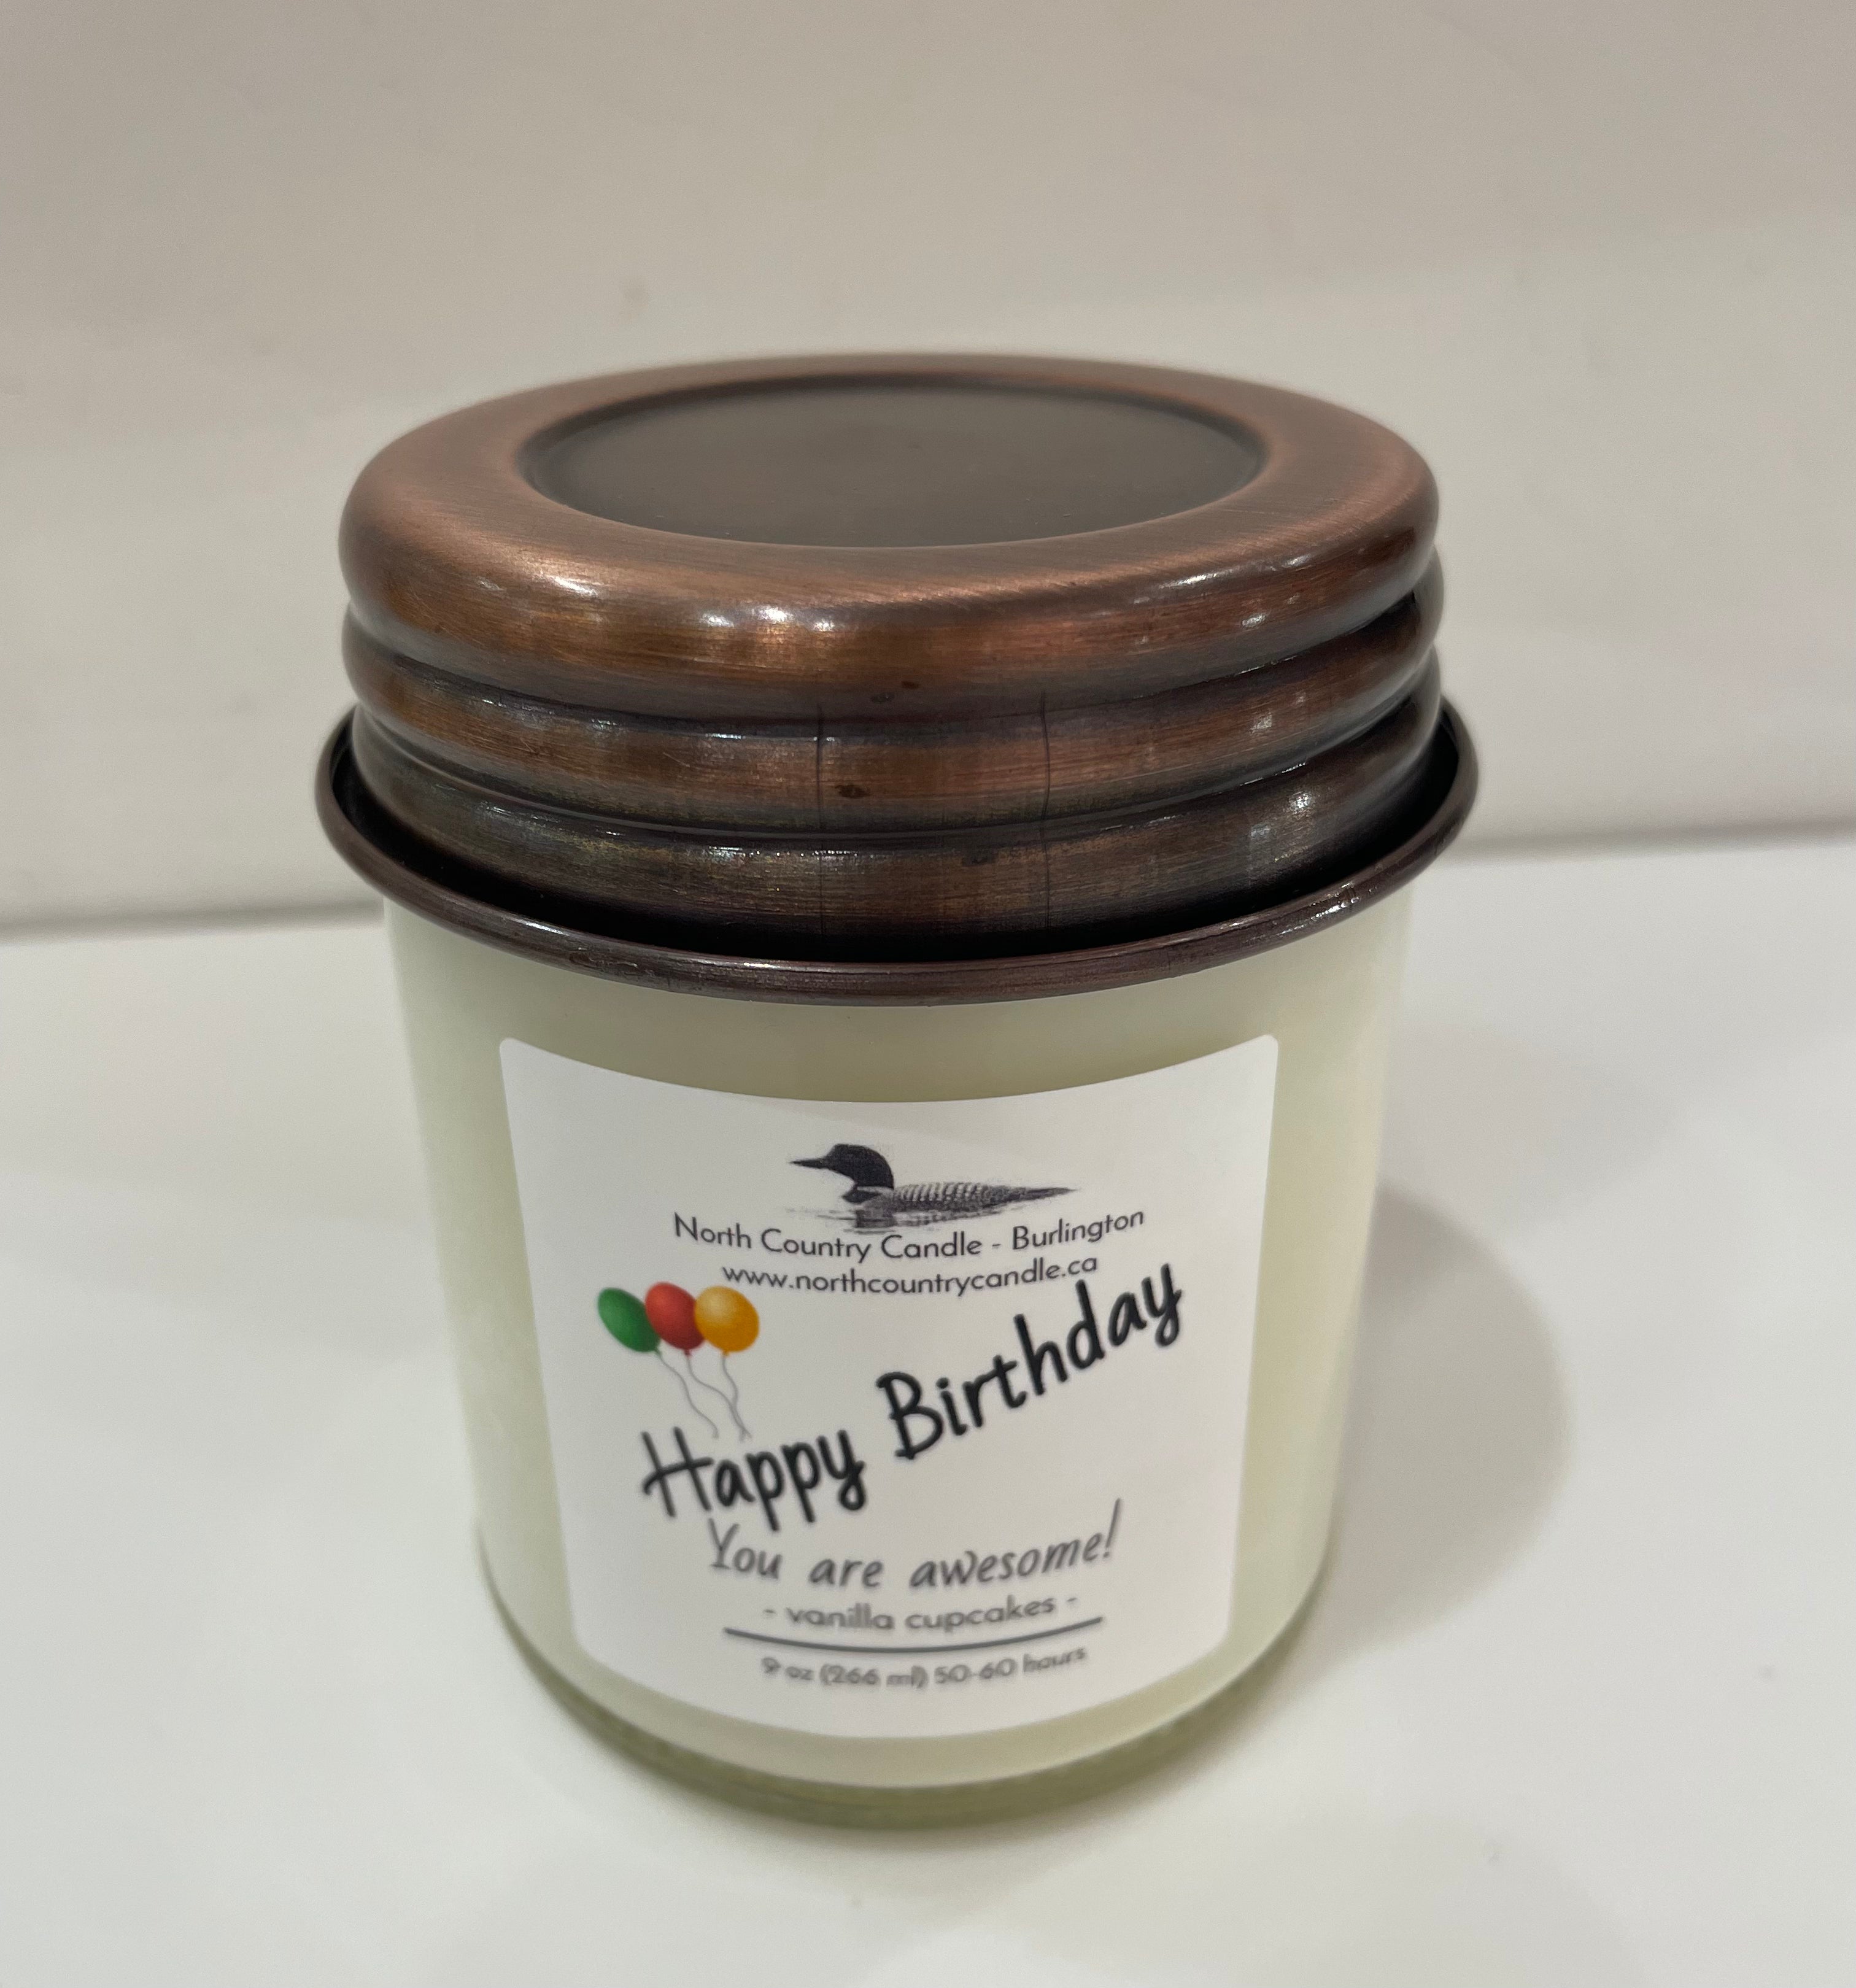 North Country Candle HAPPY BIRTHDAY 9oz Soy Candle